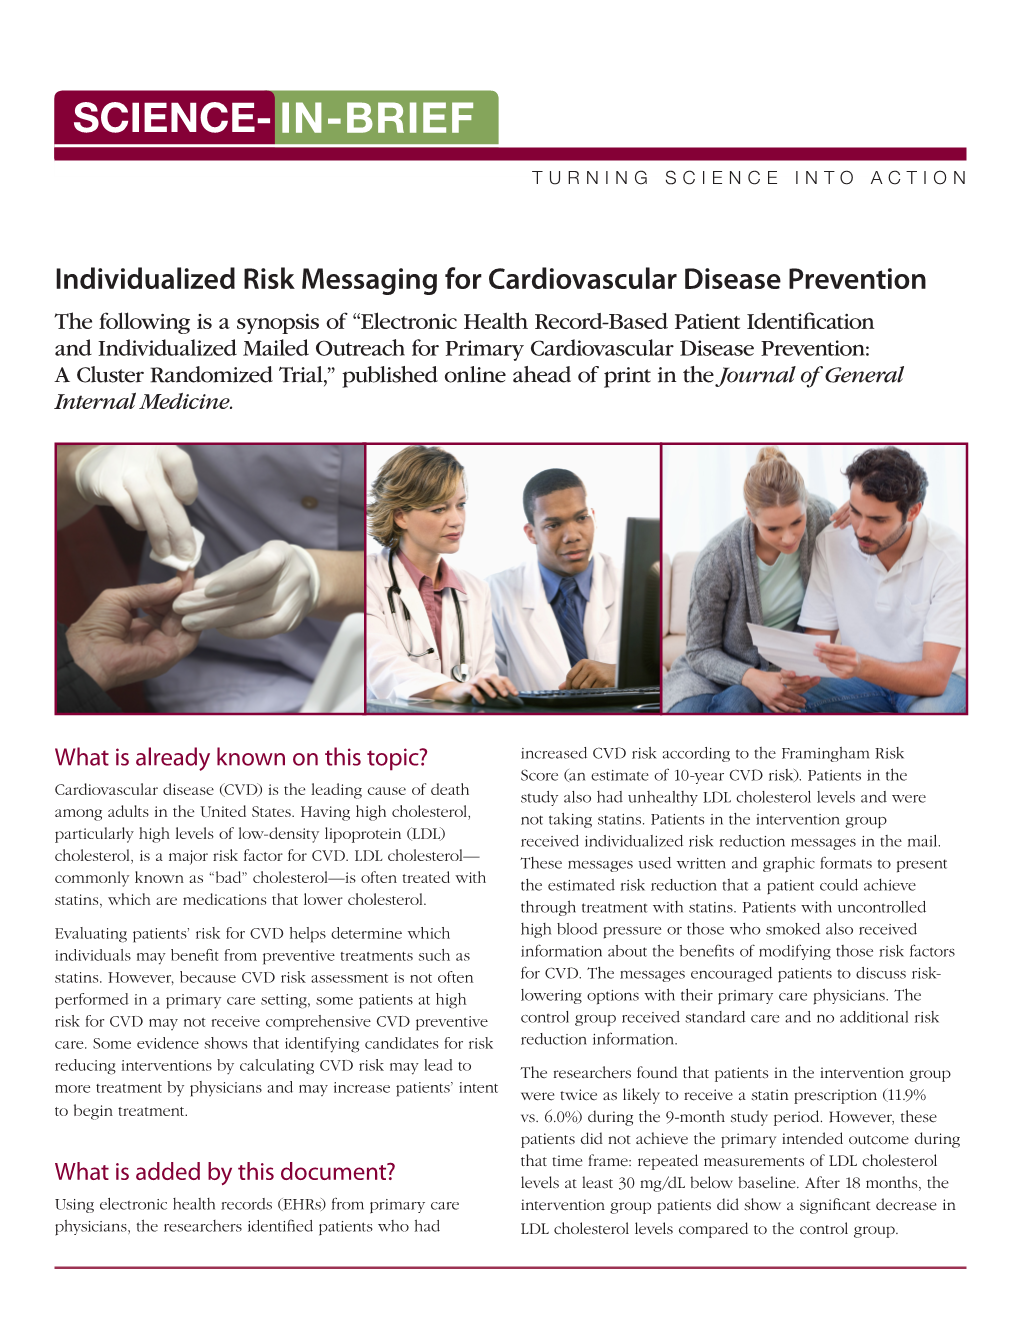 Individualized Risk Messaging for Cardiovascular Disease Prevention